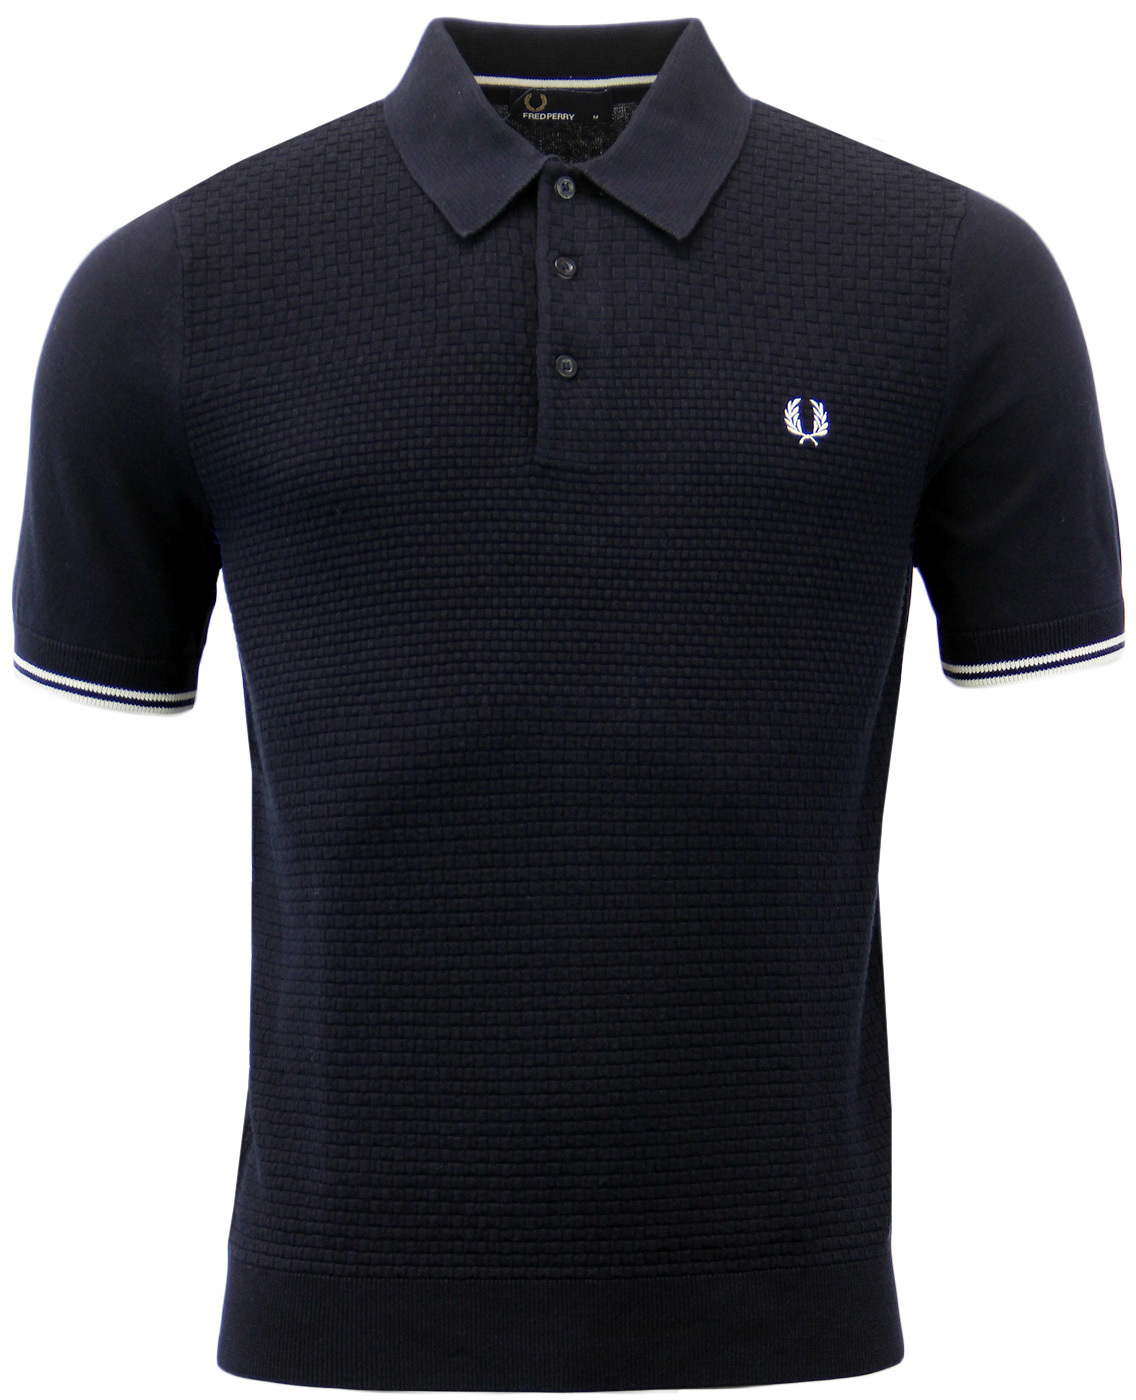 FRED PERRY Men's Retro Mod Knitted Polo Shirt